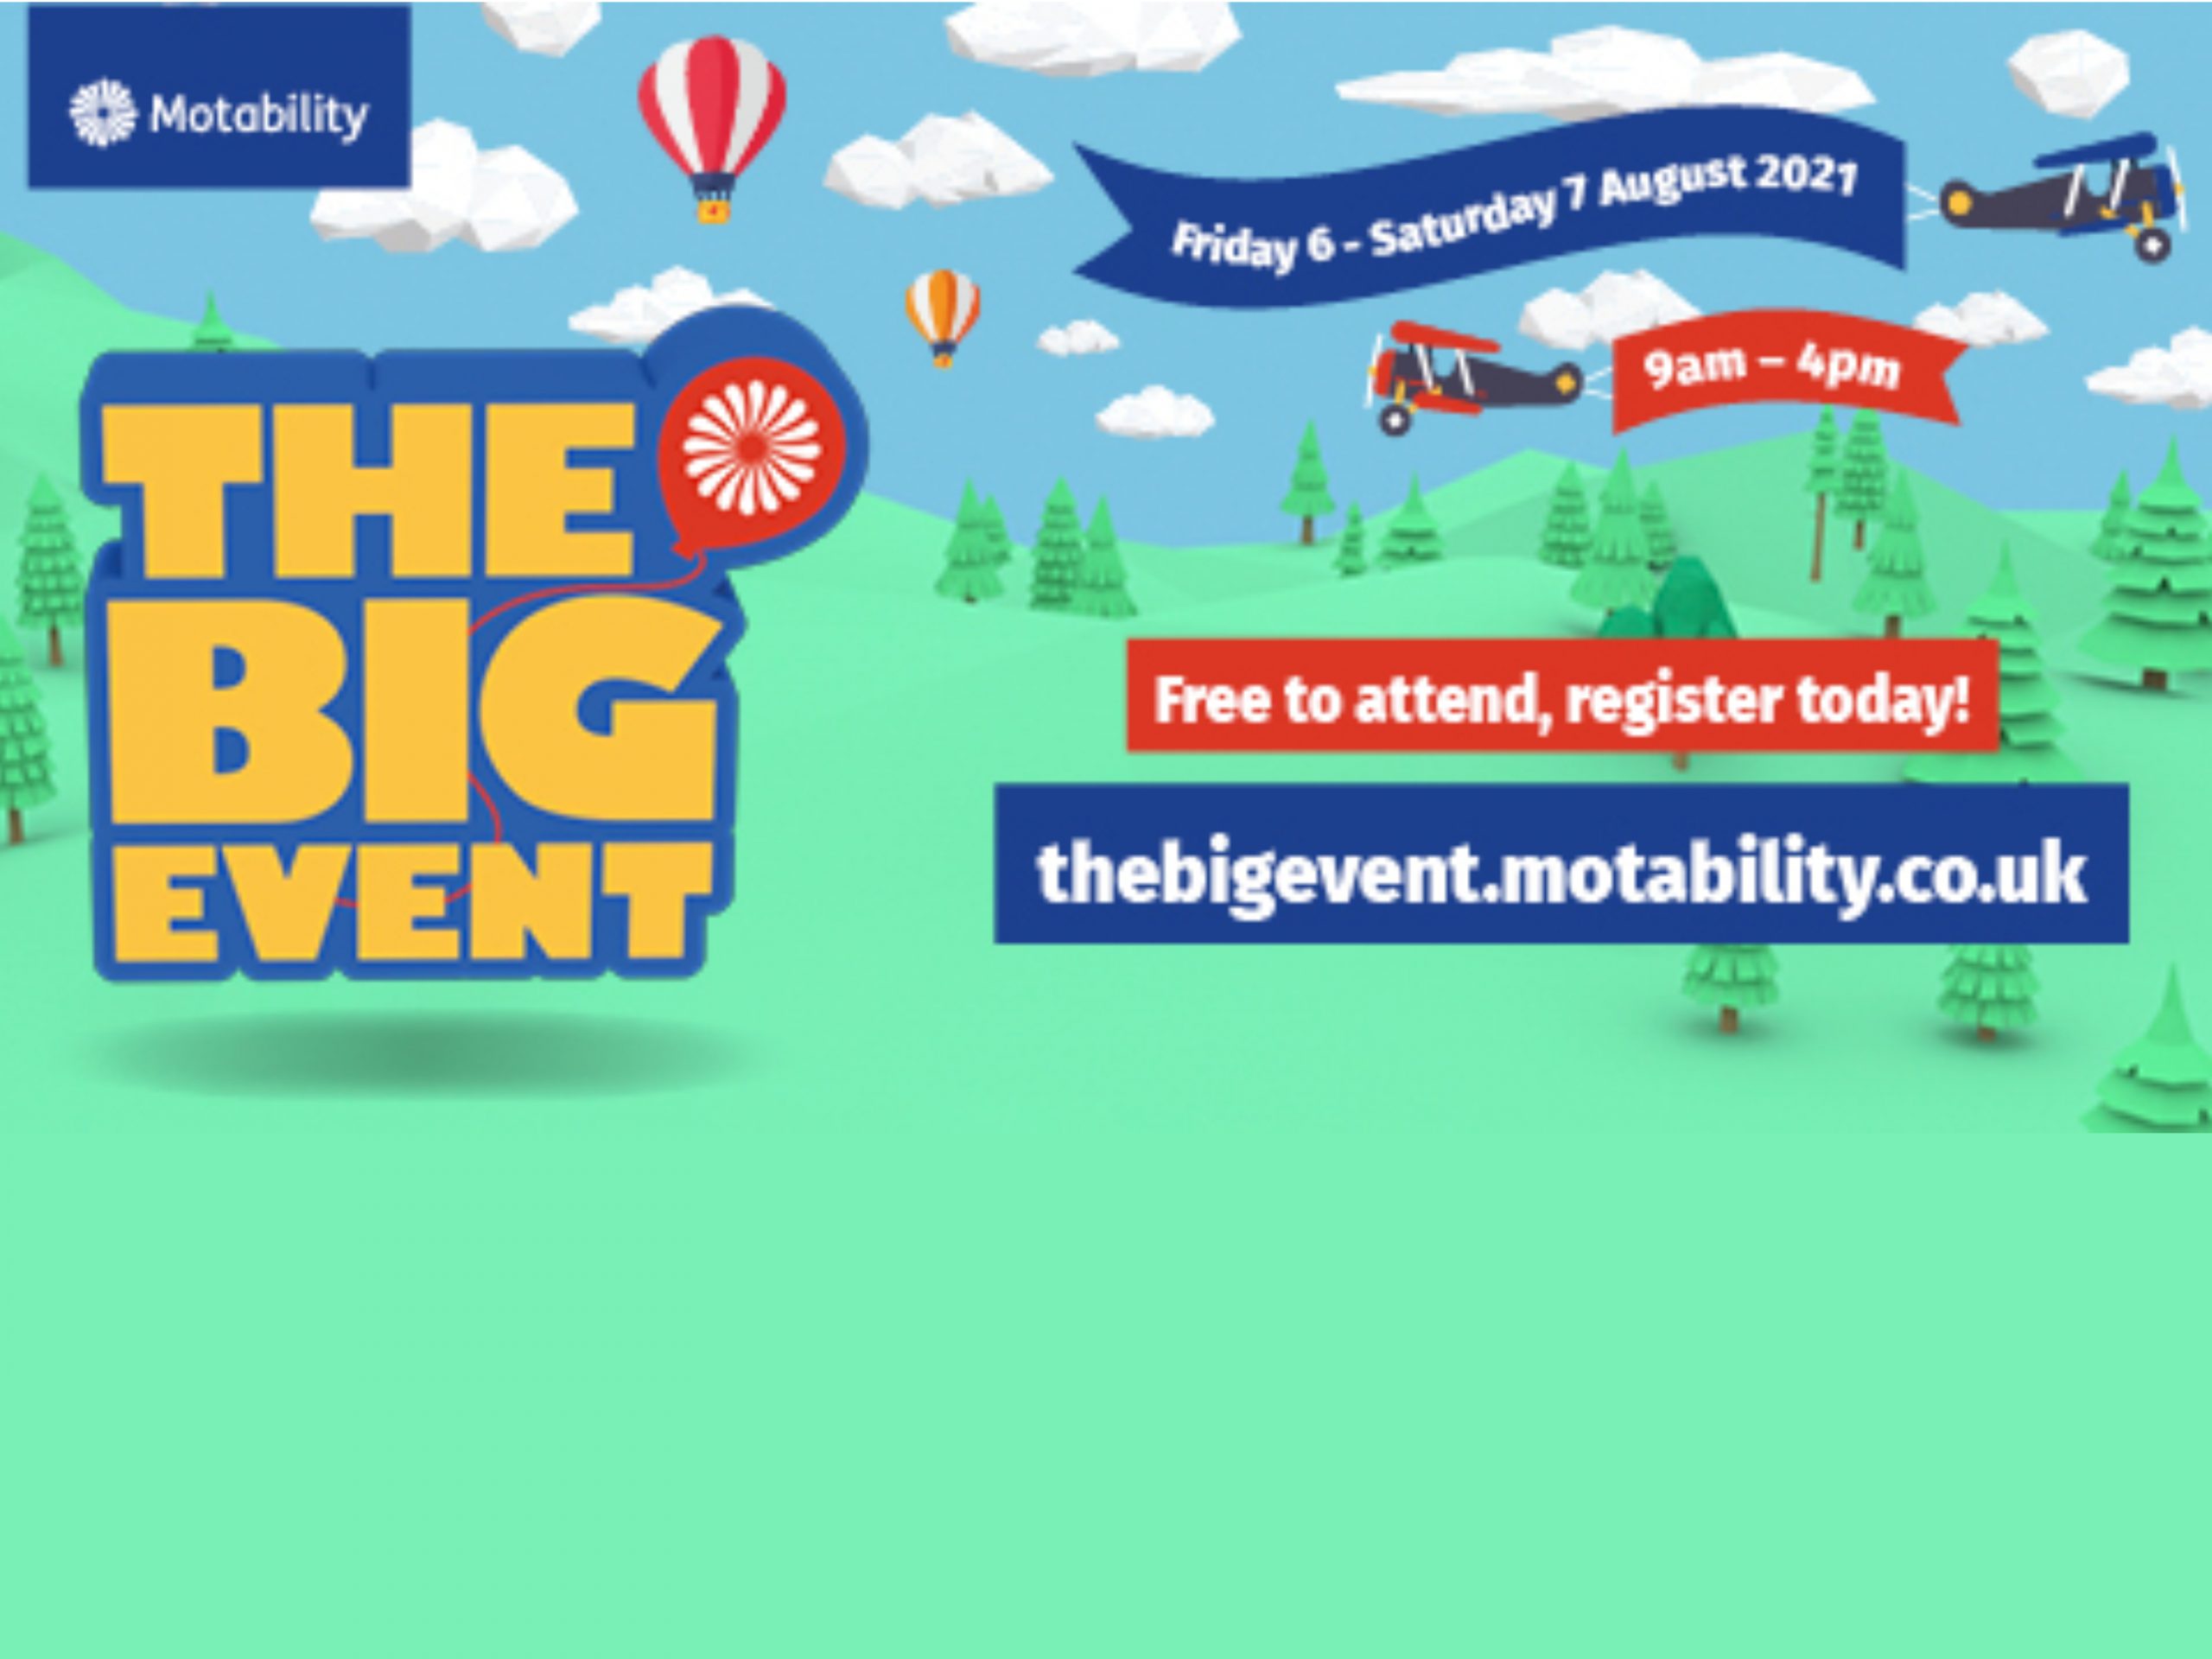 Driving Mobility to showcase assessment services for drivers with disabilities at Motability’s The Big Event